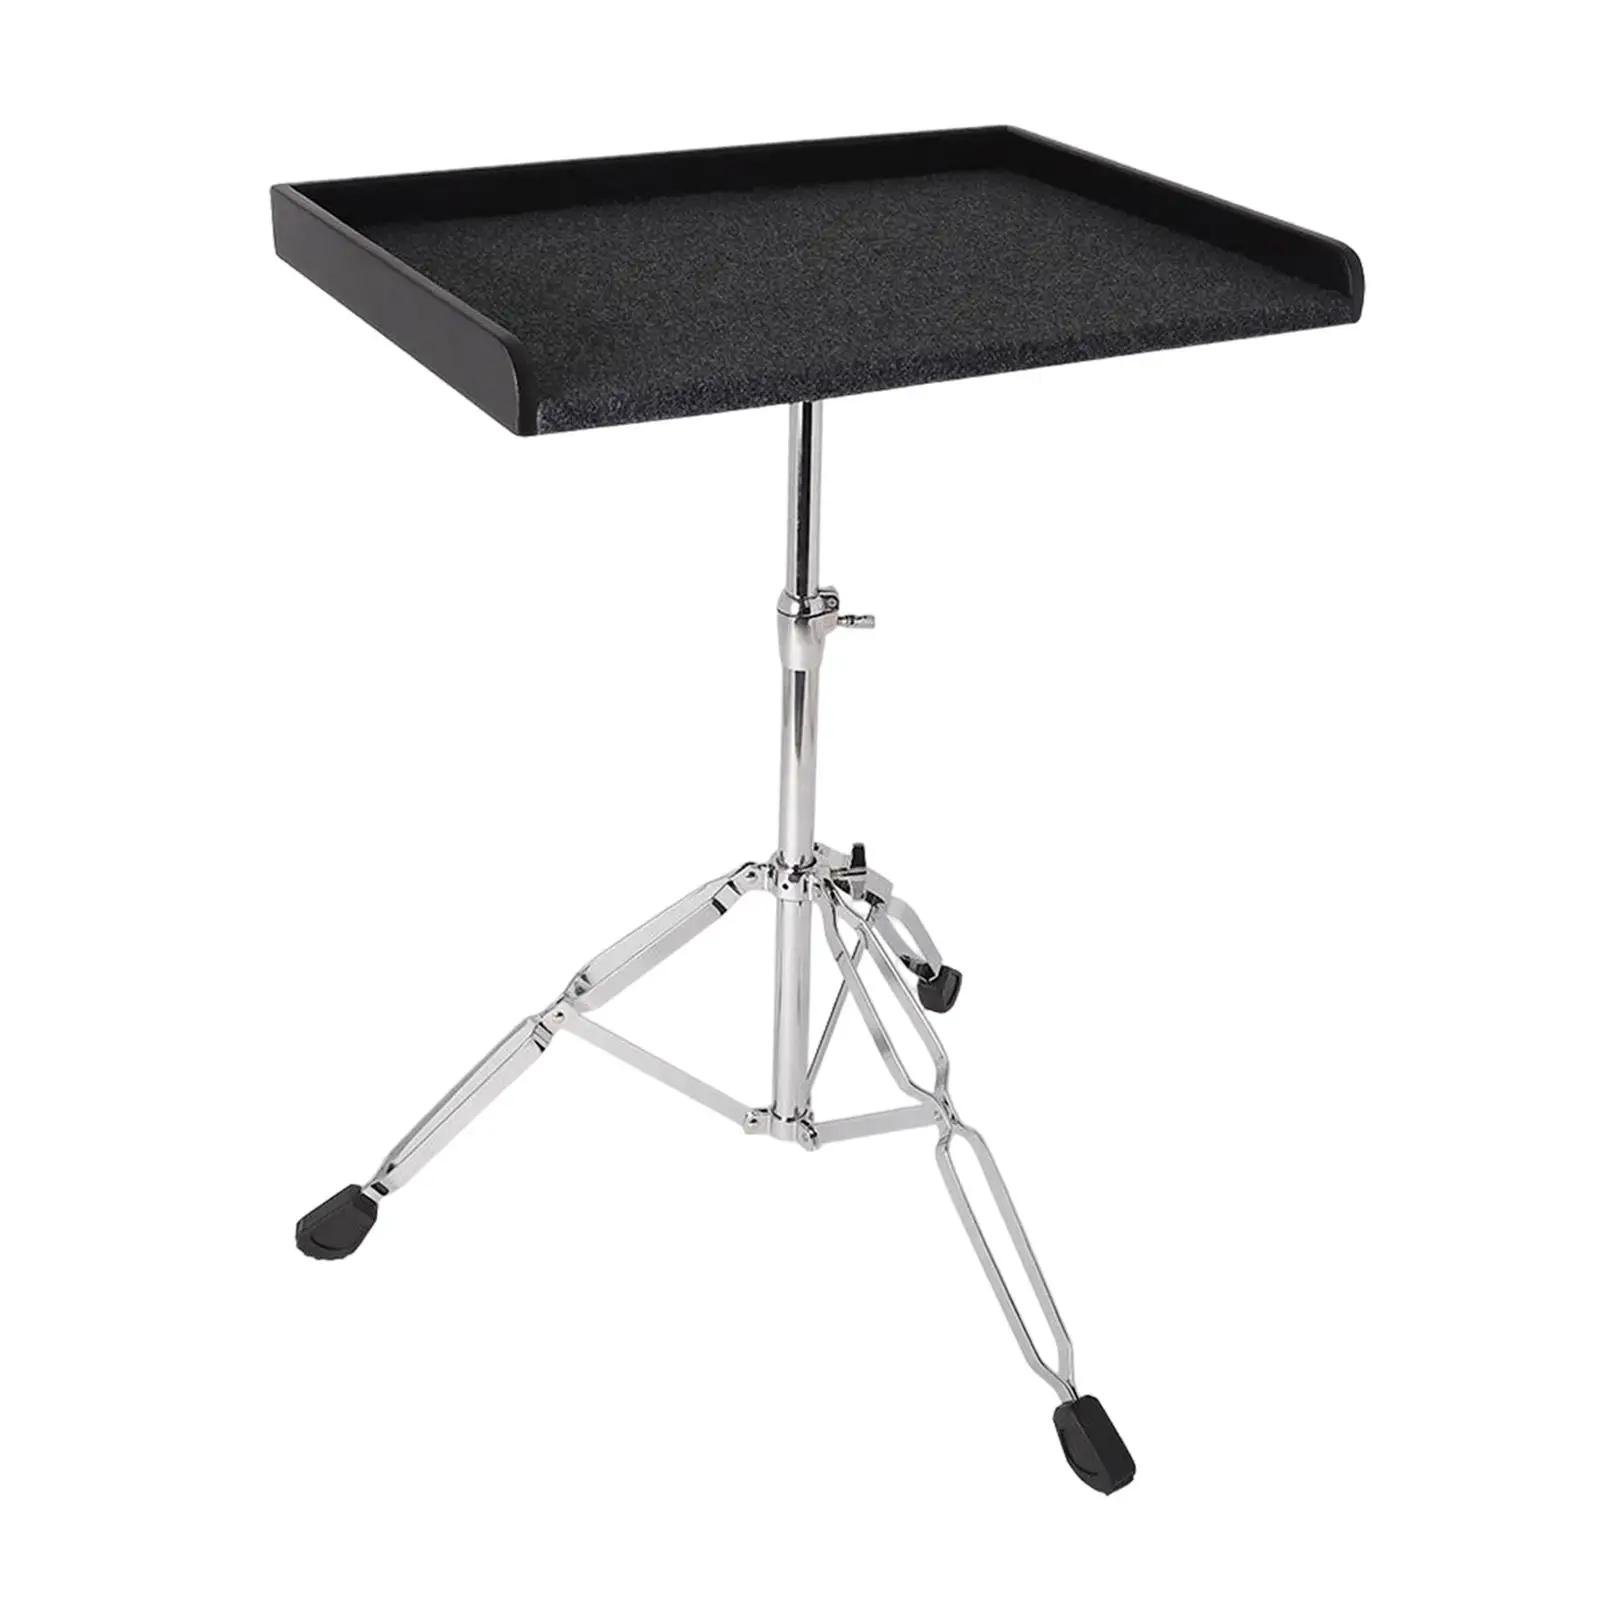 Percussion Table Mount Holder Thick EVA Padded DJ Laptop Portable for Stage